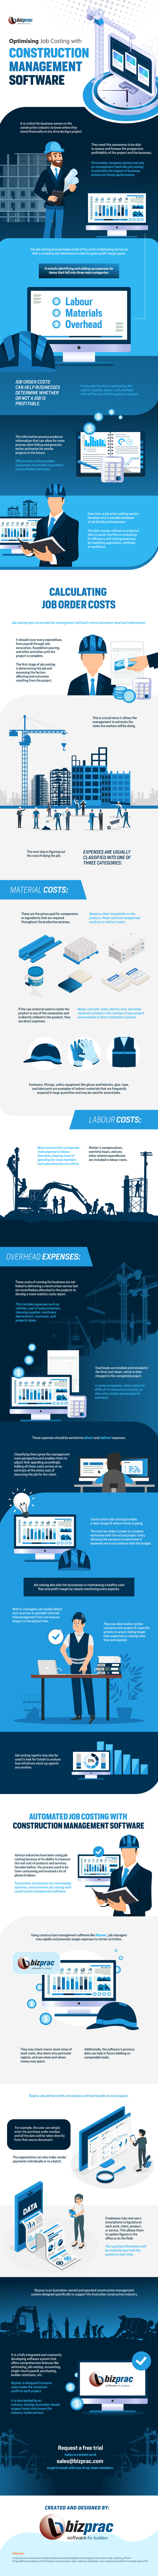 Optimizing-Job-Costing-With-Construction-Management-Software-infographic-image-0163